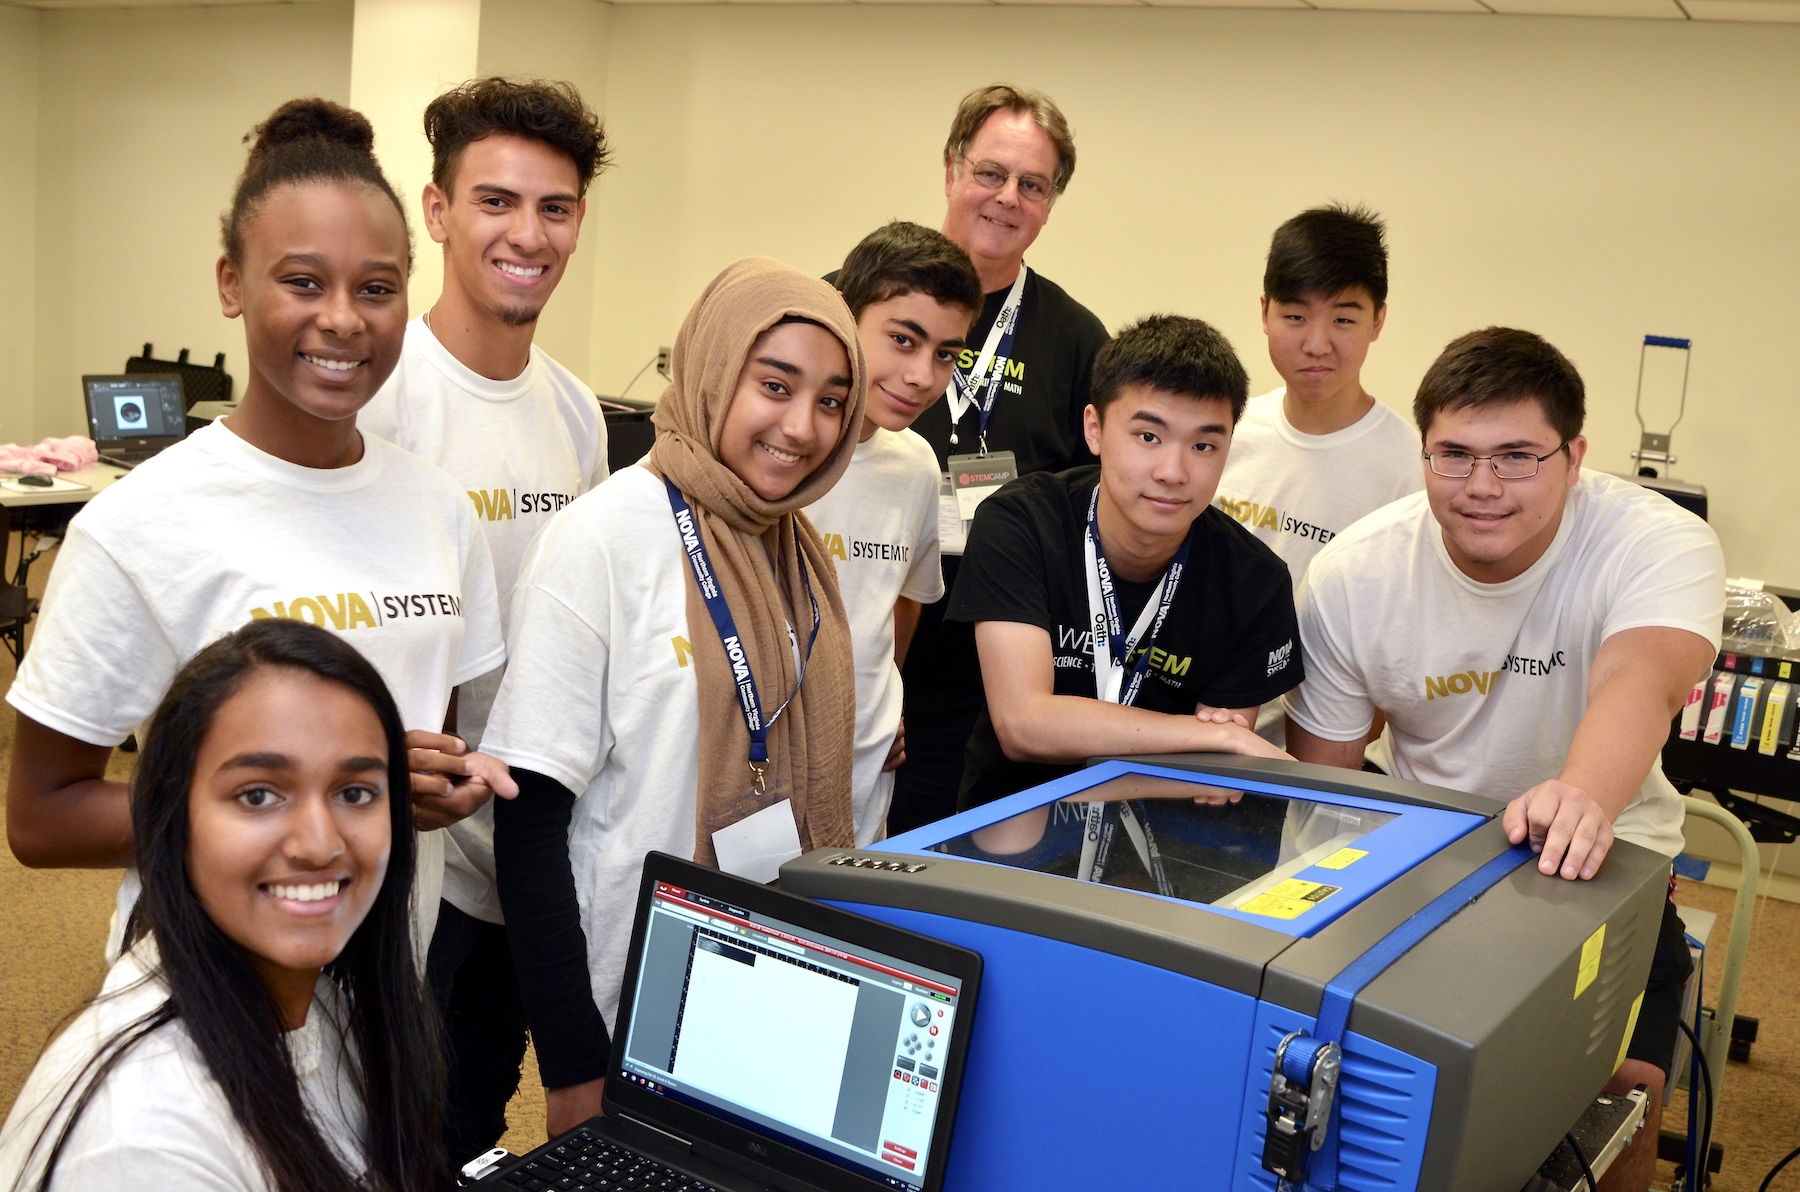 A group of students standing around a computer and a 3D printer, smiling